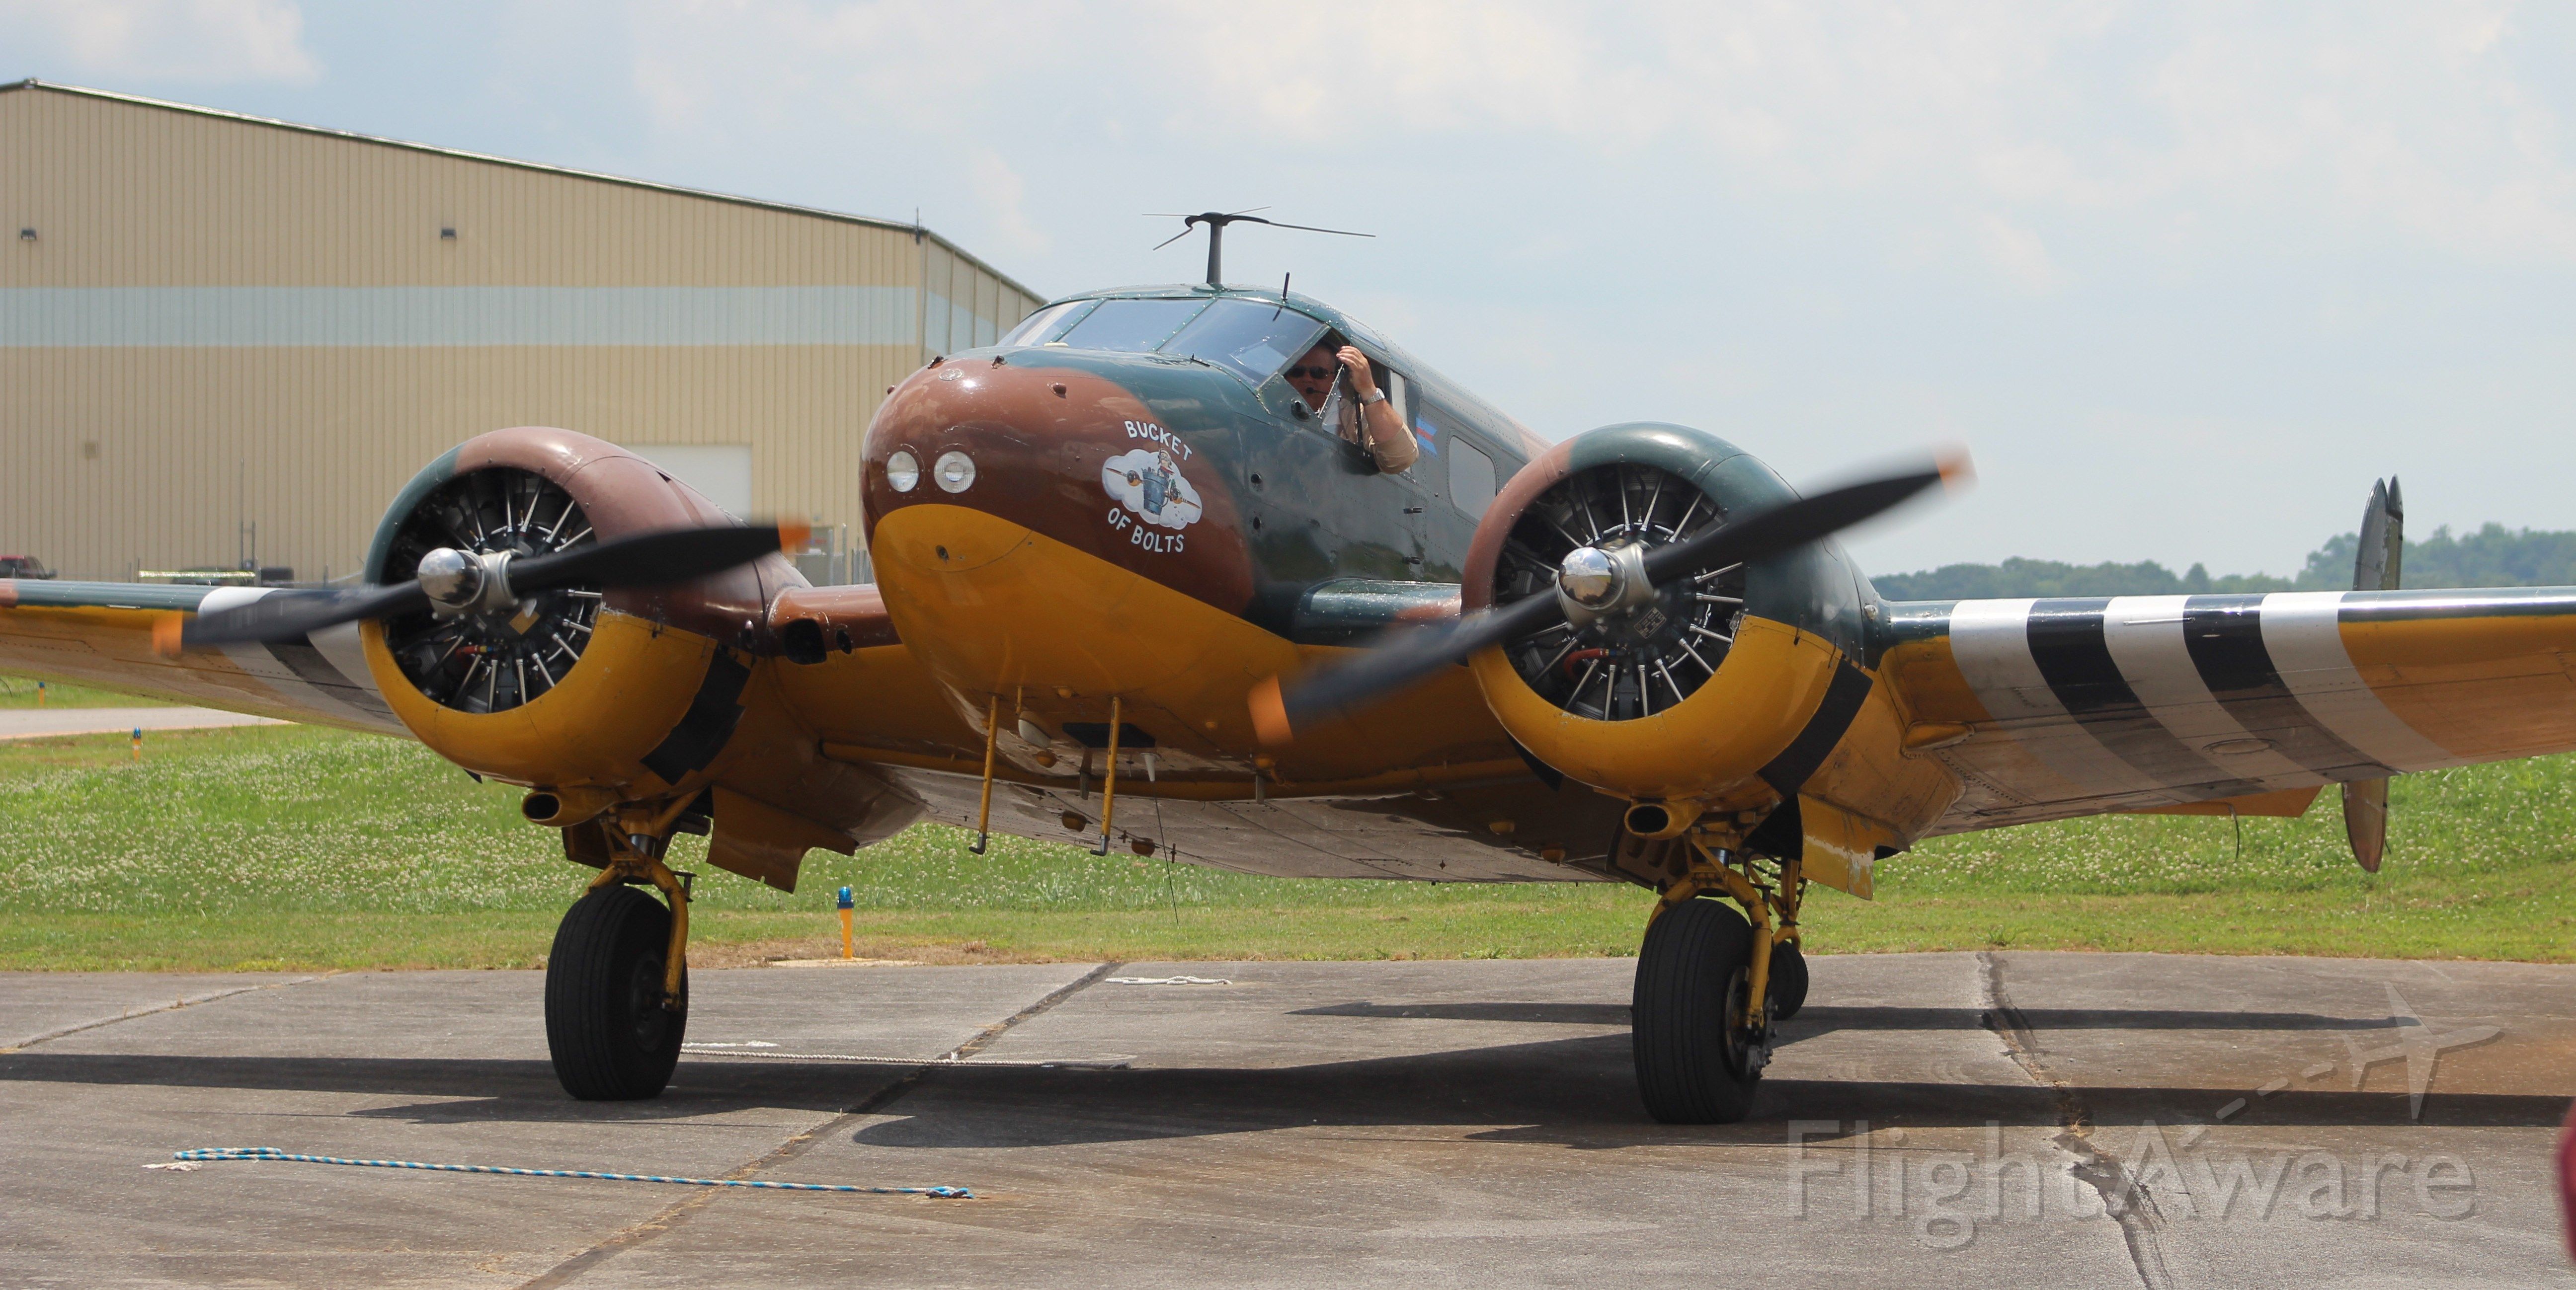 N70GA — - The Commemorative Air Forces C-45 Expediter "Bucket of Bolts" taxiing to park at Tom Sharp, Jr. Field, Huntsville Executive Airport, Meridianville, AL, during the Airpower History Tour stop - May 25, 2018